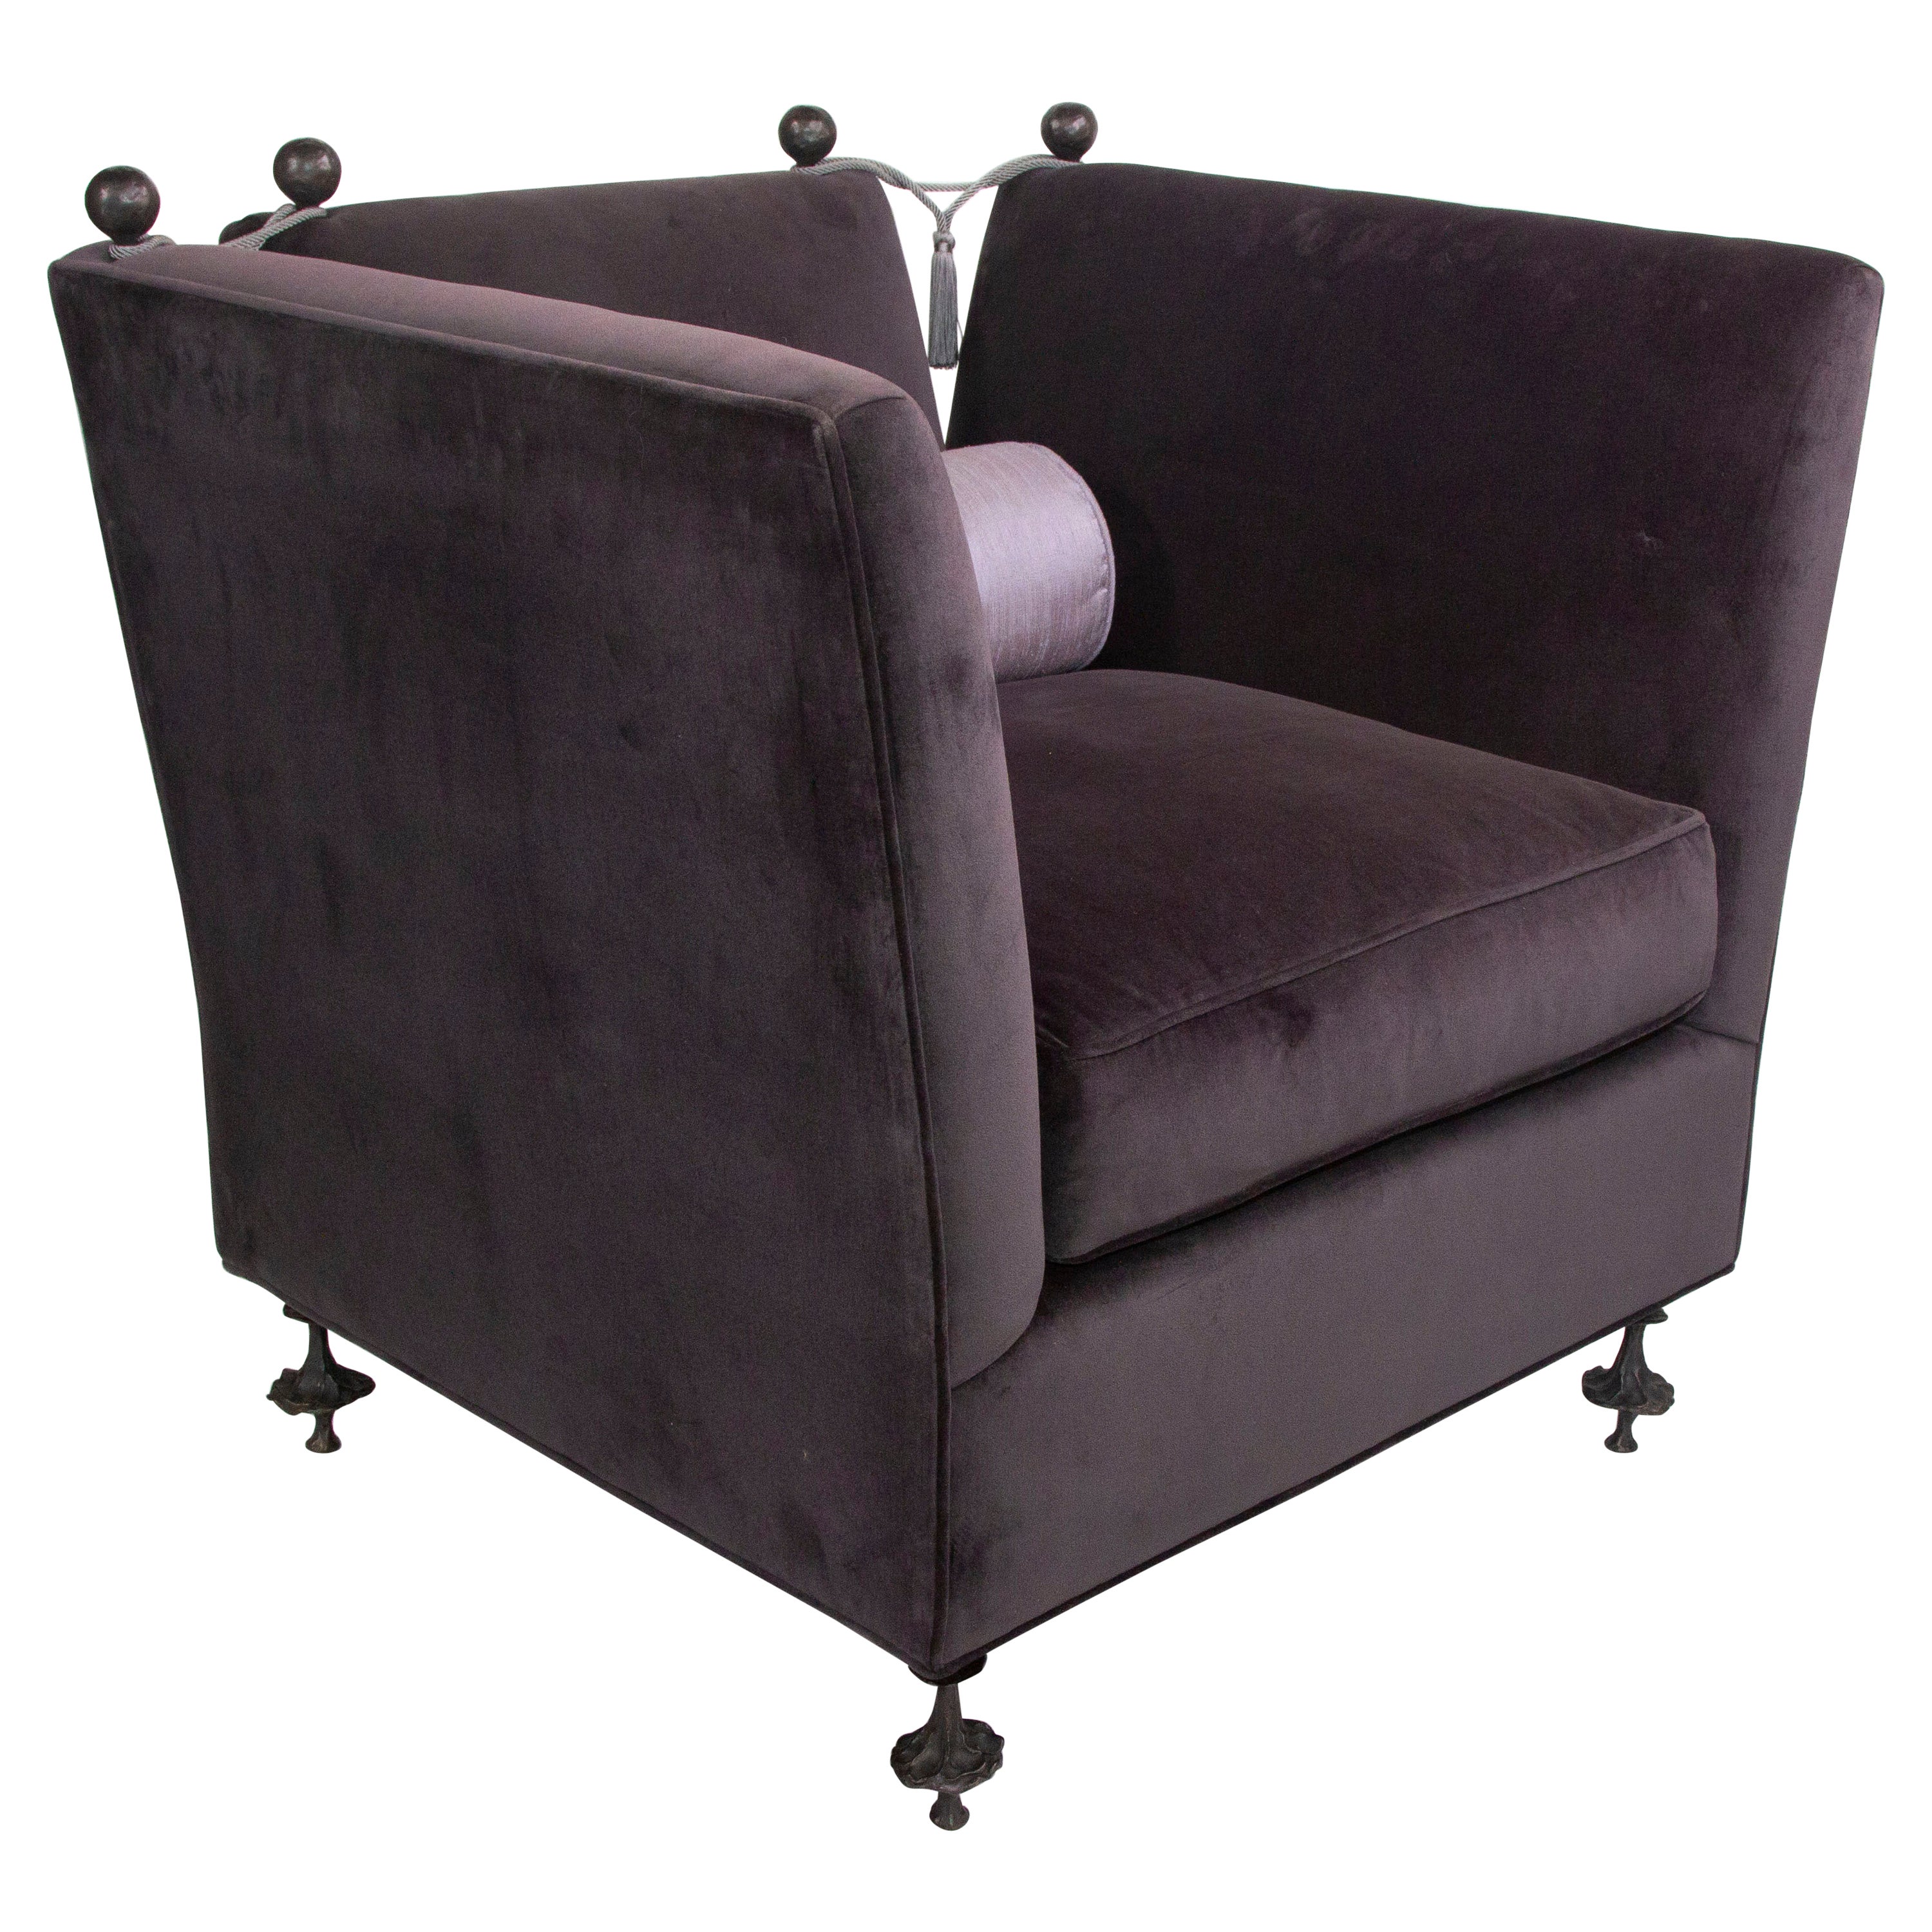 Tuxedo english Knole  Armchair with bronze Legs For Sale